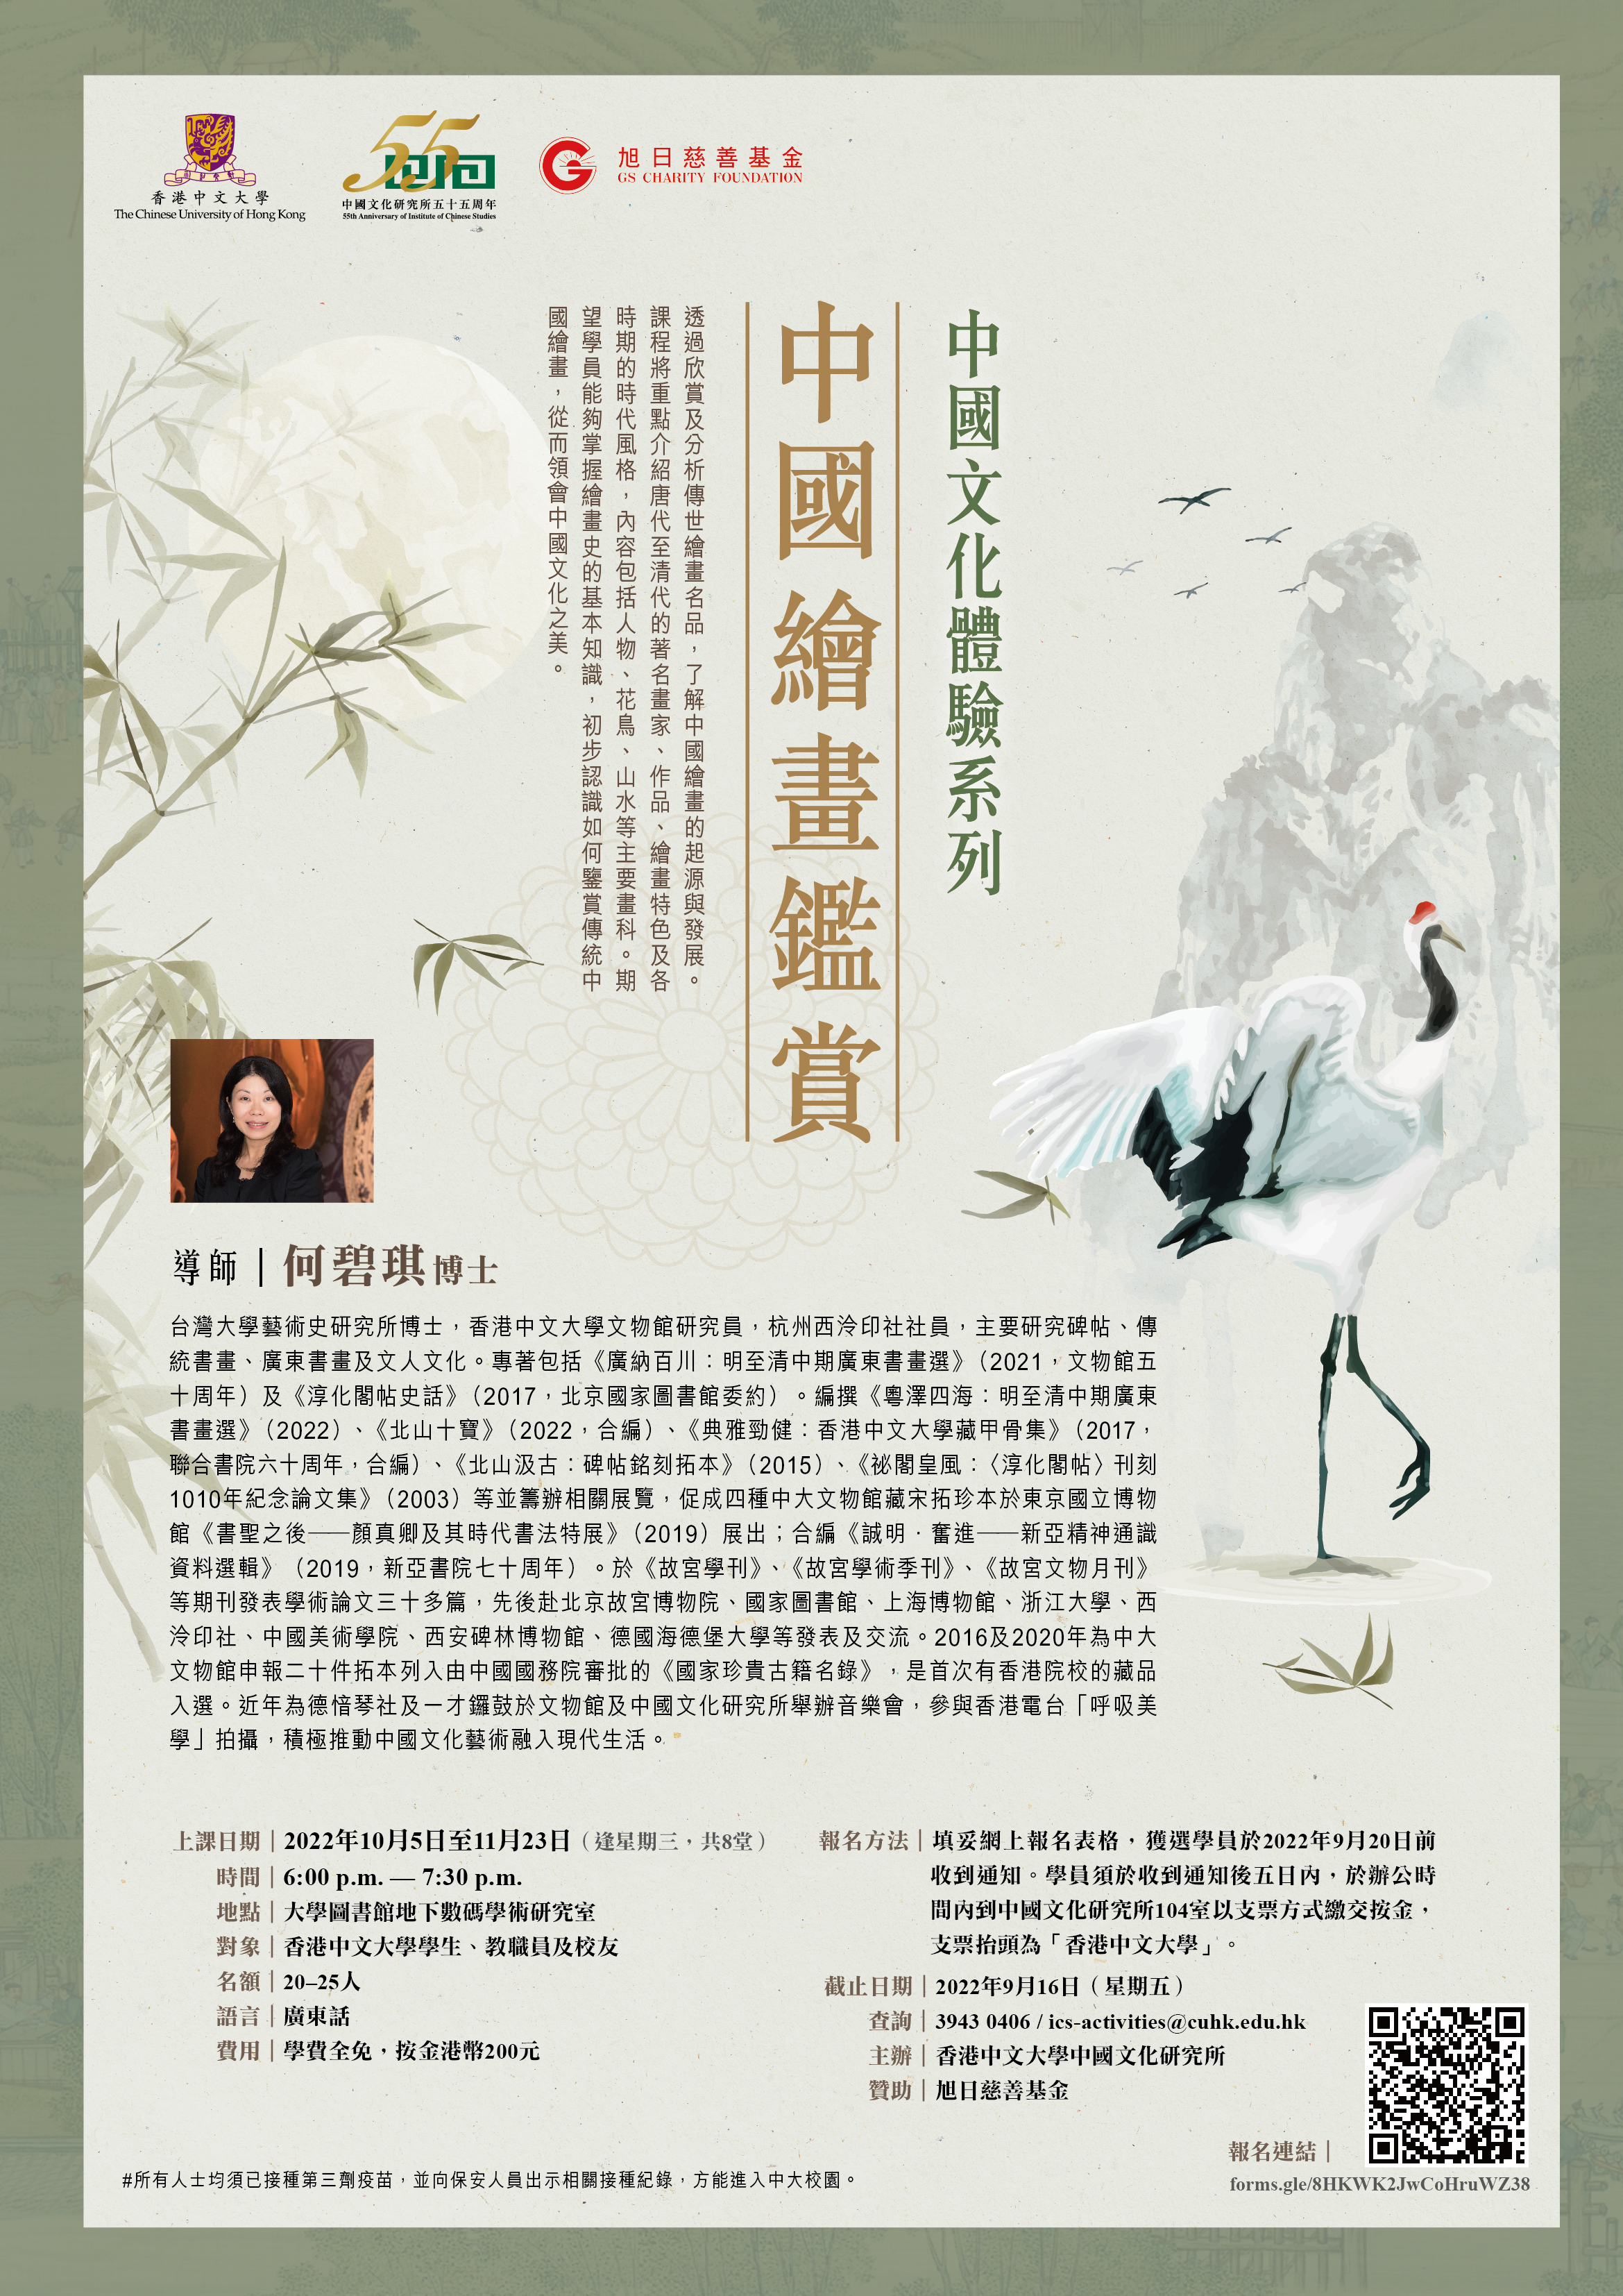 Experiencing Chinese Culture Series - Appreciation of Chinese Painting